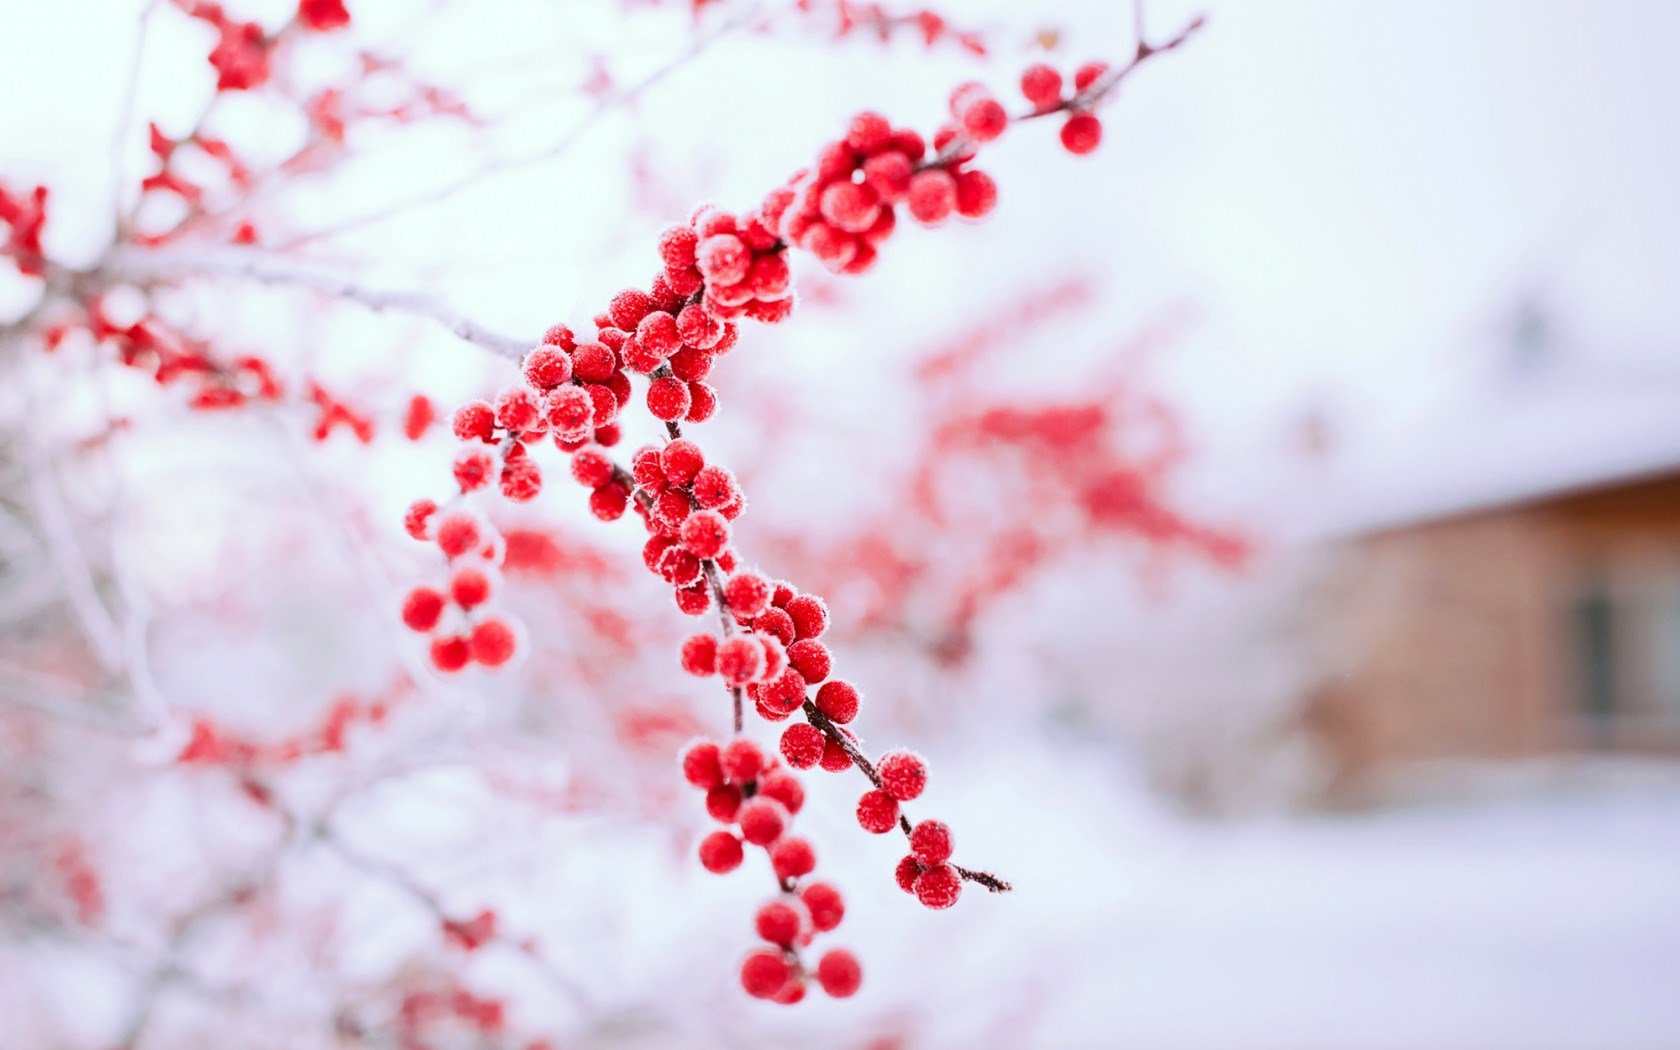  Winter Nature Wallpapers High Quality Long Wallpapers 1680x1050 1680x1050